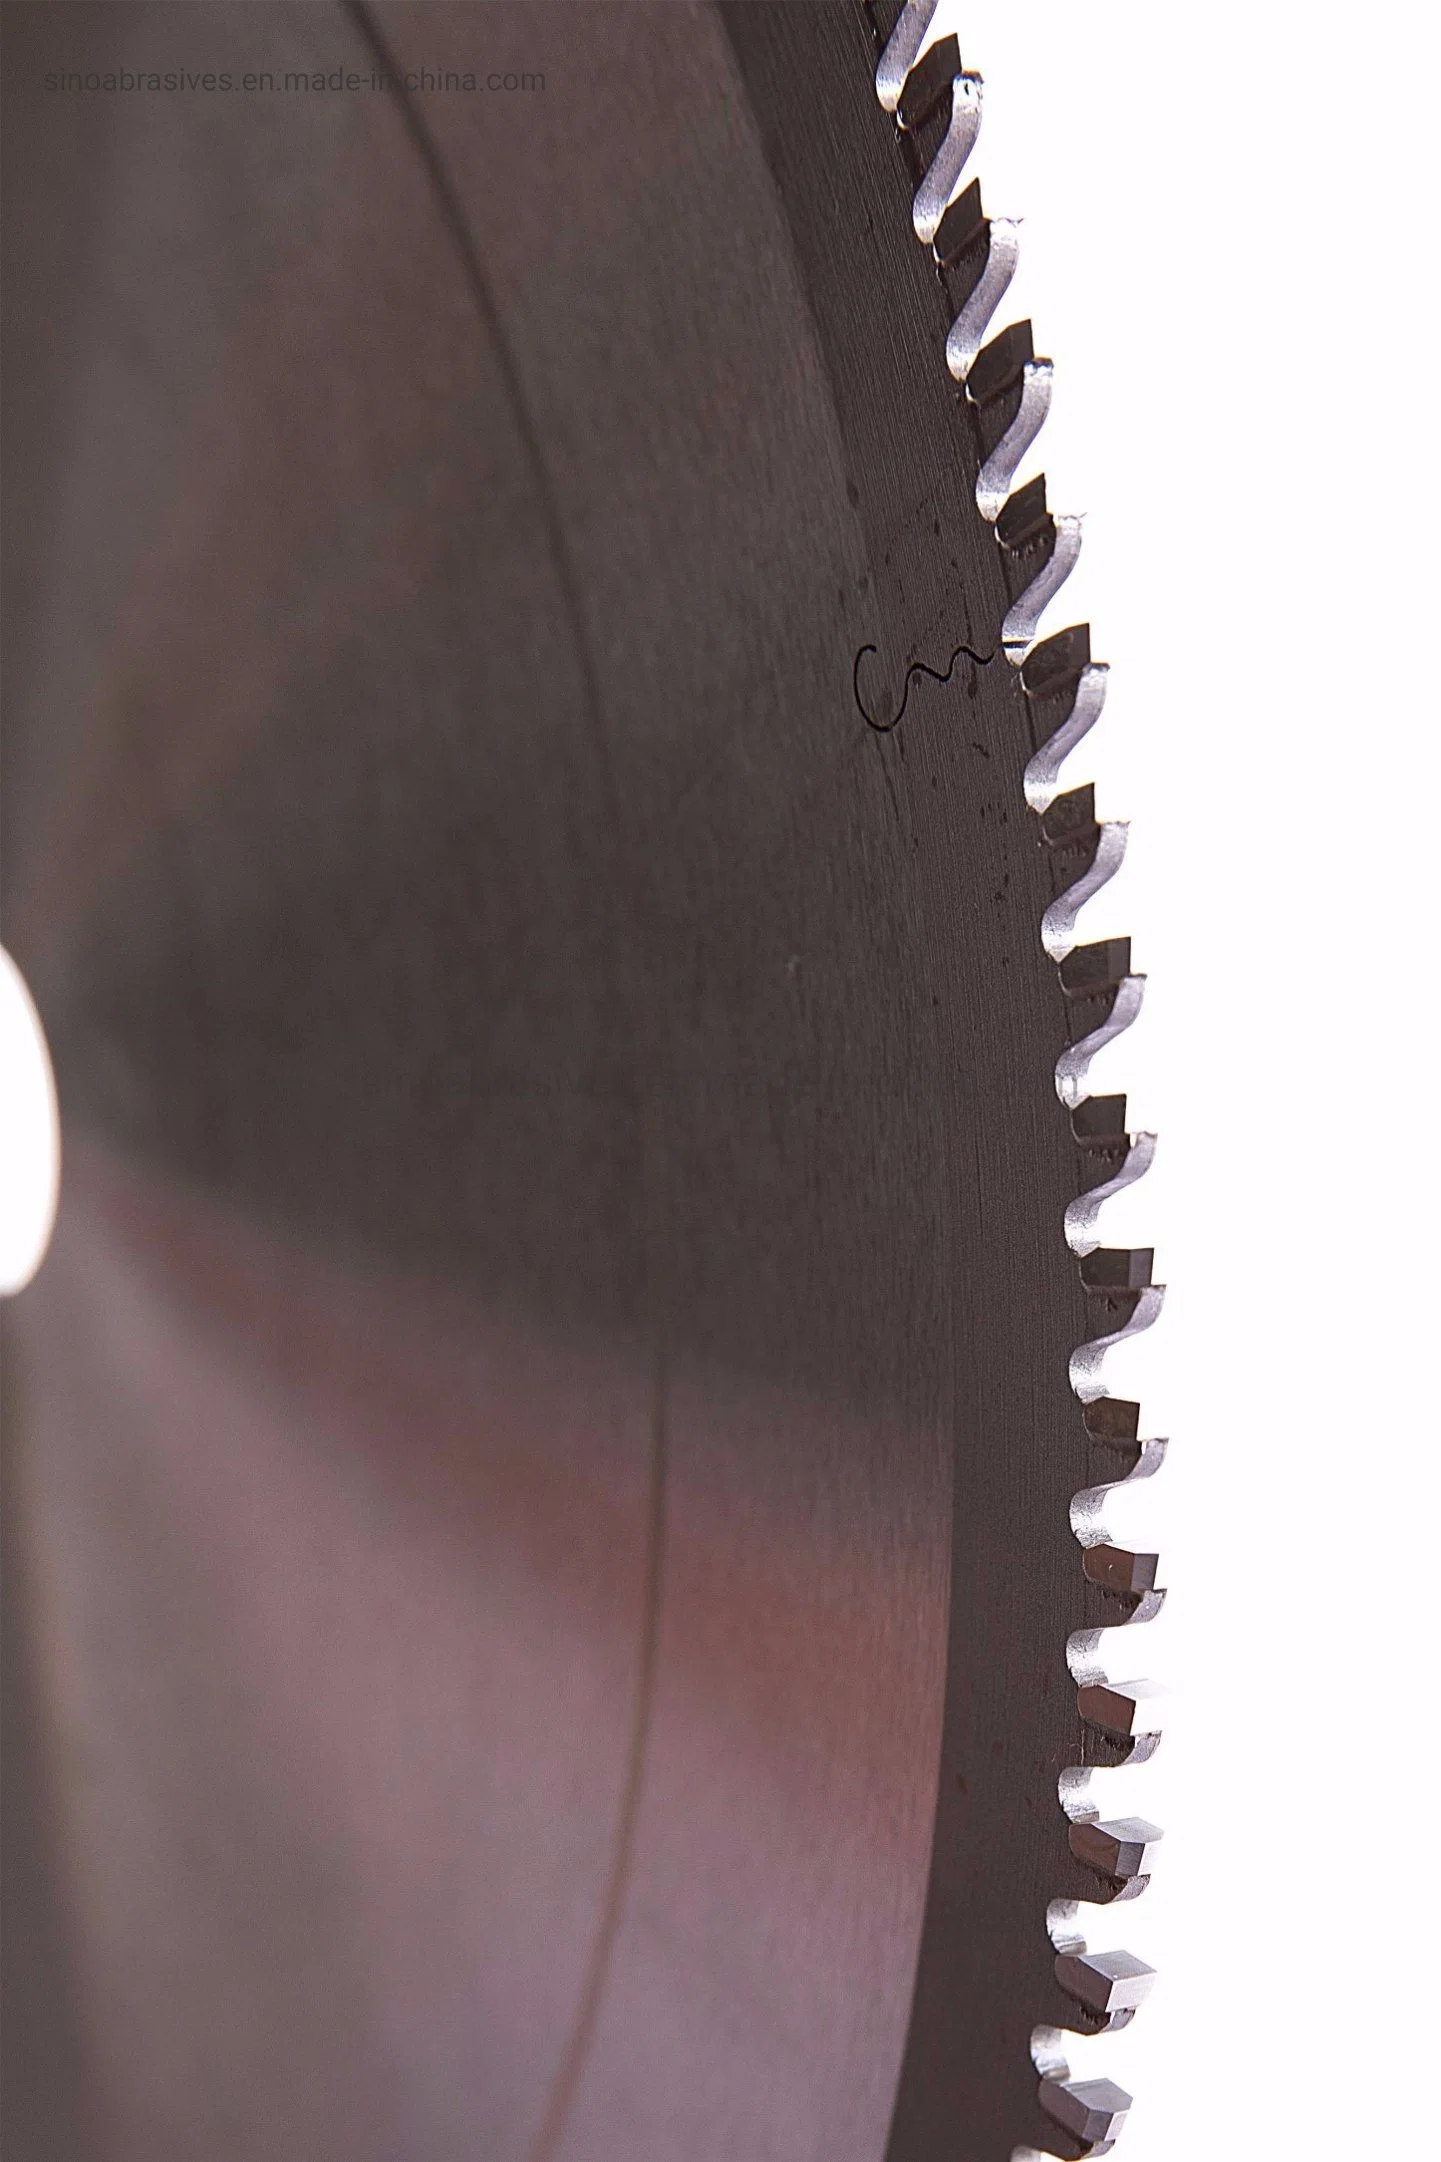 Industrial Class Quality Tct Carbide Saw Blade with Ceratizit Tungsten and Sumitomo Tips for Aluminium Cutting